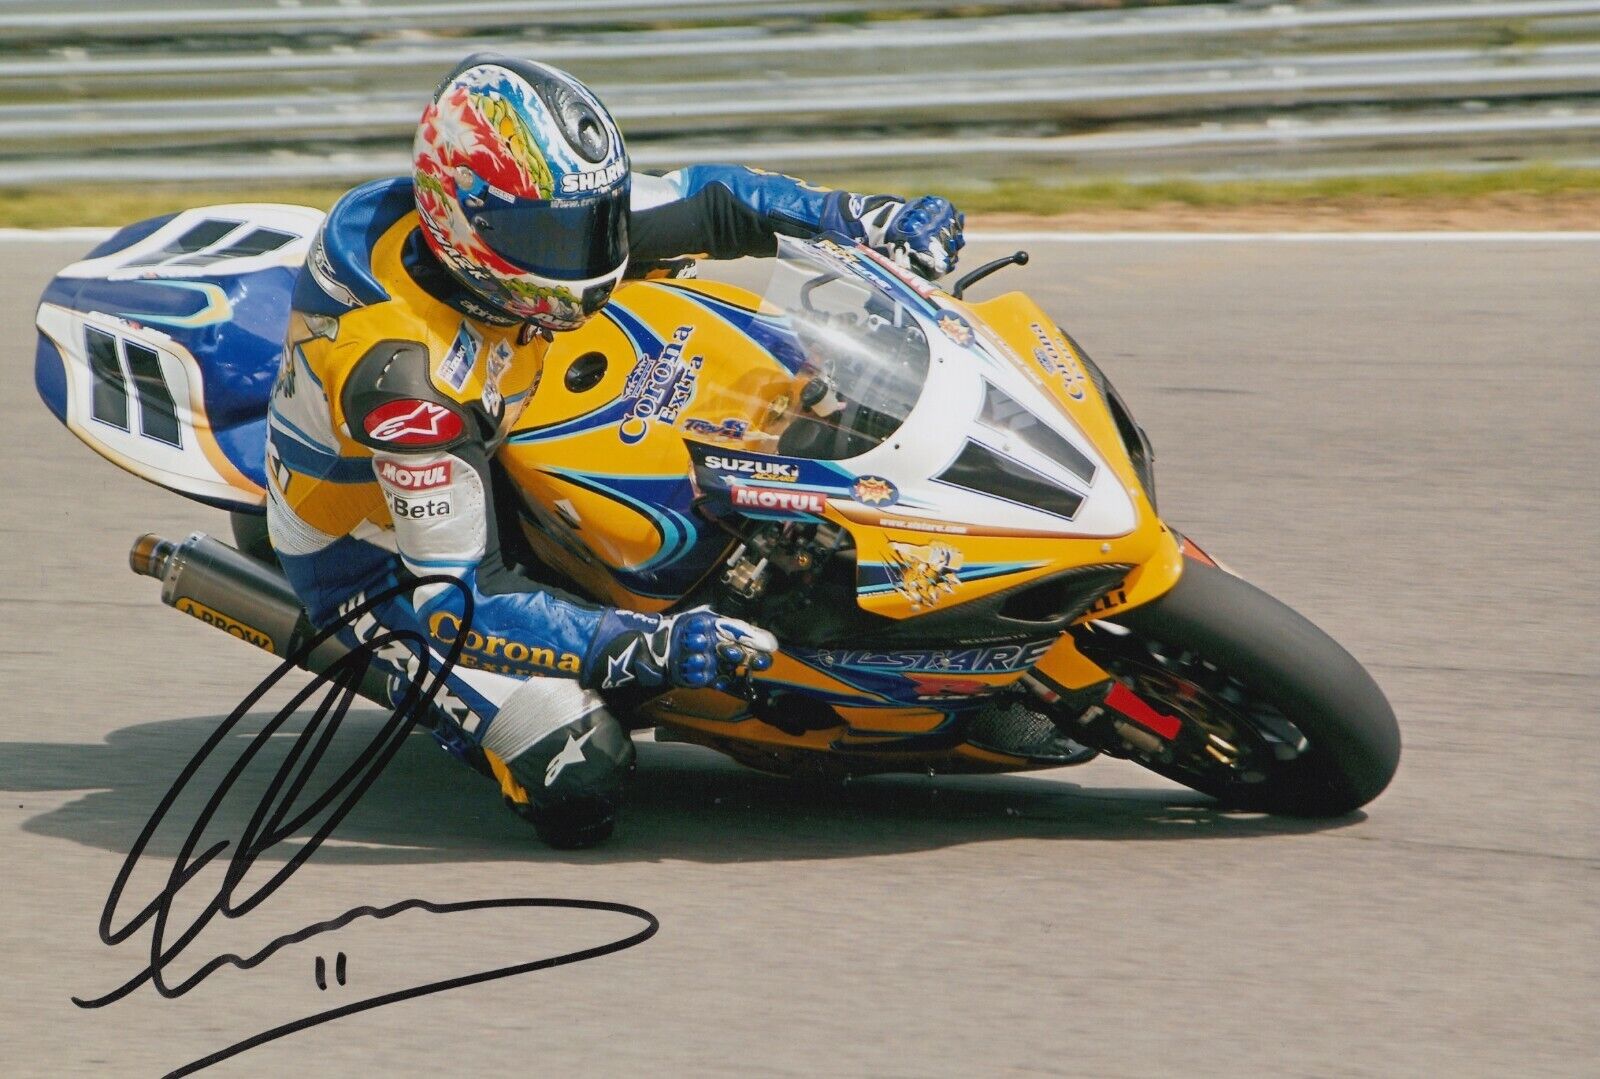 Troy Corser Hand Signed 12x8 Photo Poster painting - Suzuki Autograph.